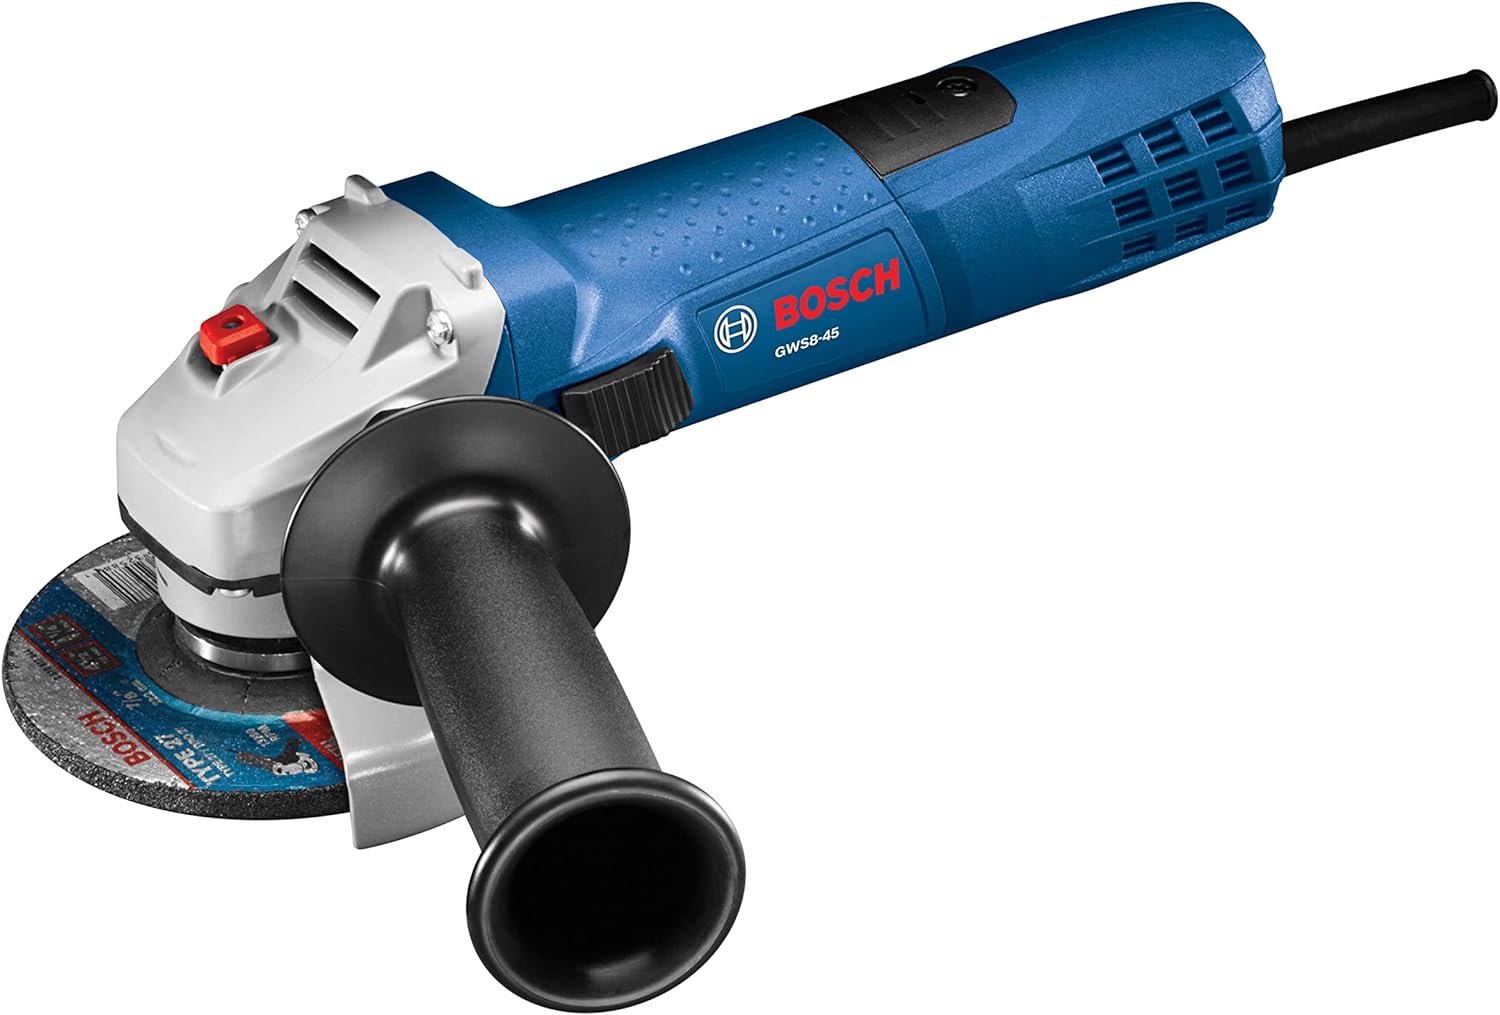 BOSCH 4-1/2 Inch Angle Grinder GWS8-45withBosch CWX27M450 4-1/2 In. x .098 In. X-LOCK Arbor Type 27A (ISO 42) 30 Grit Metal Cutting and Grinding Abrasive Wheel